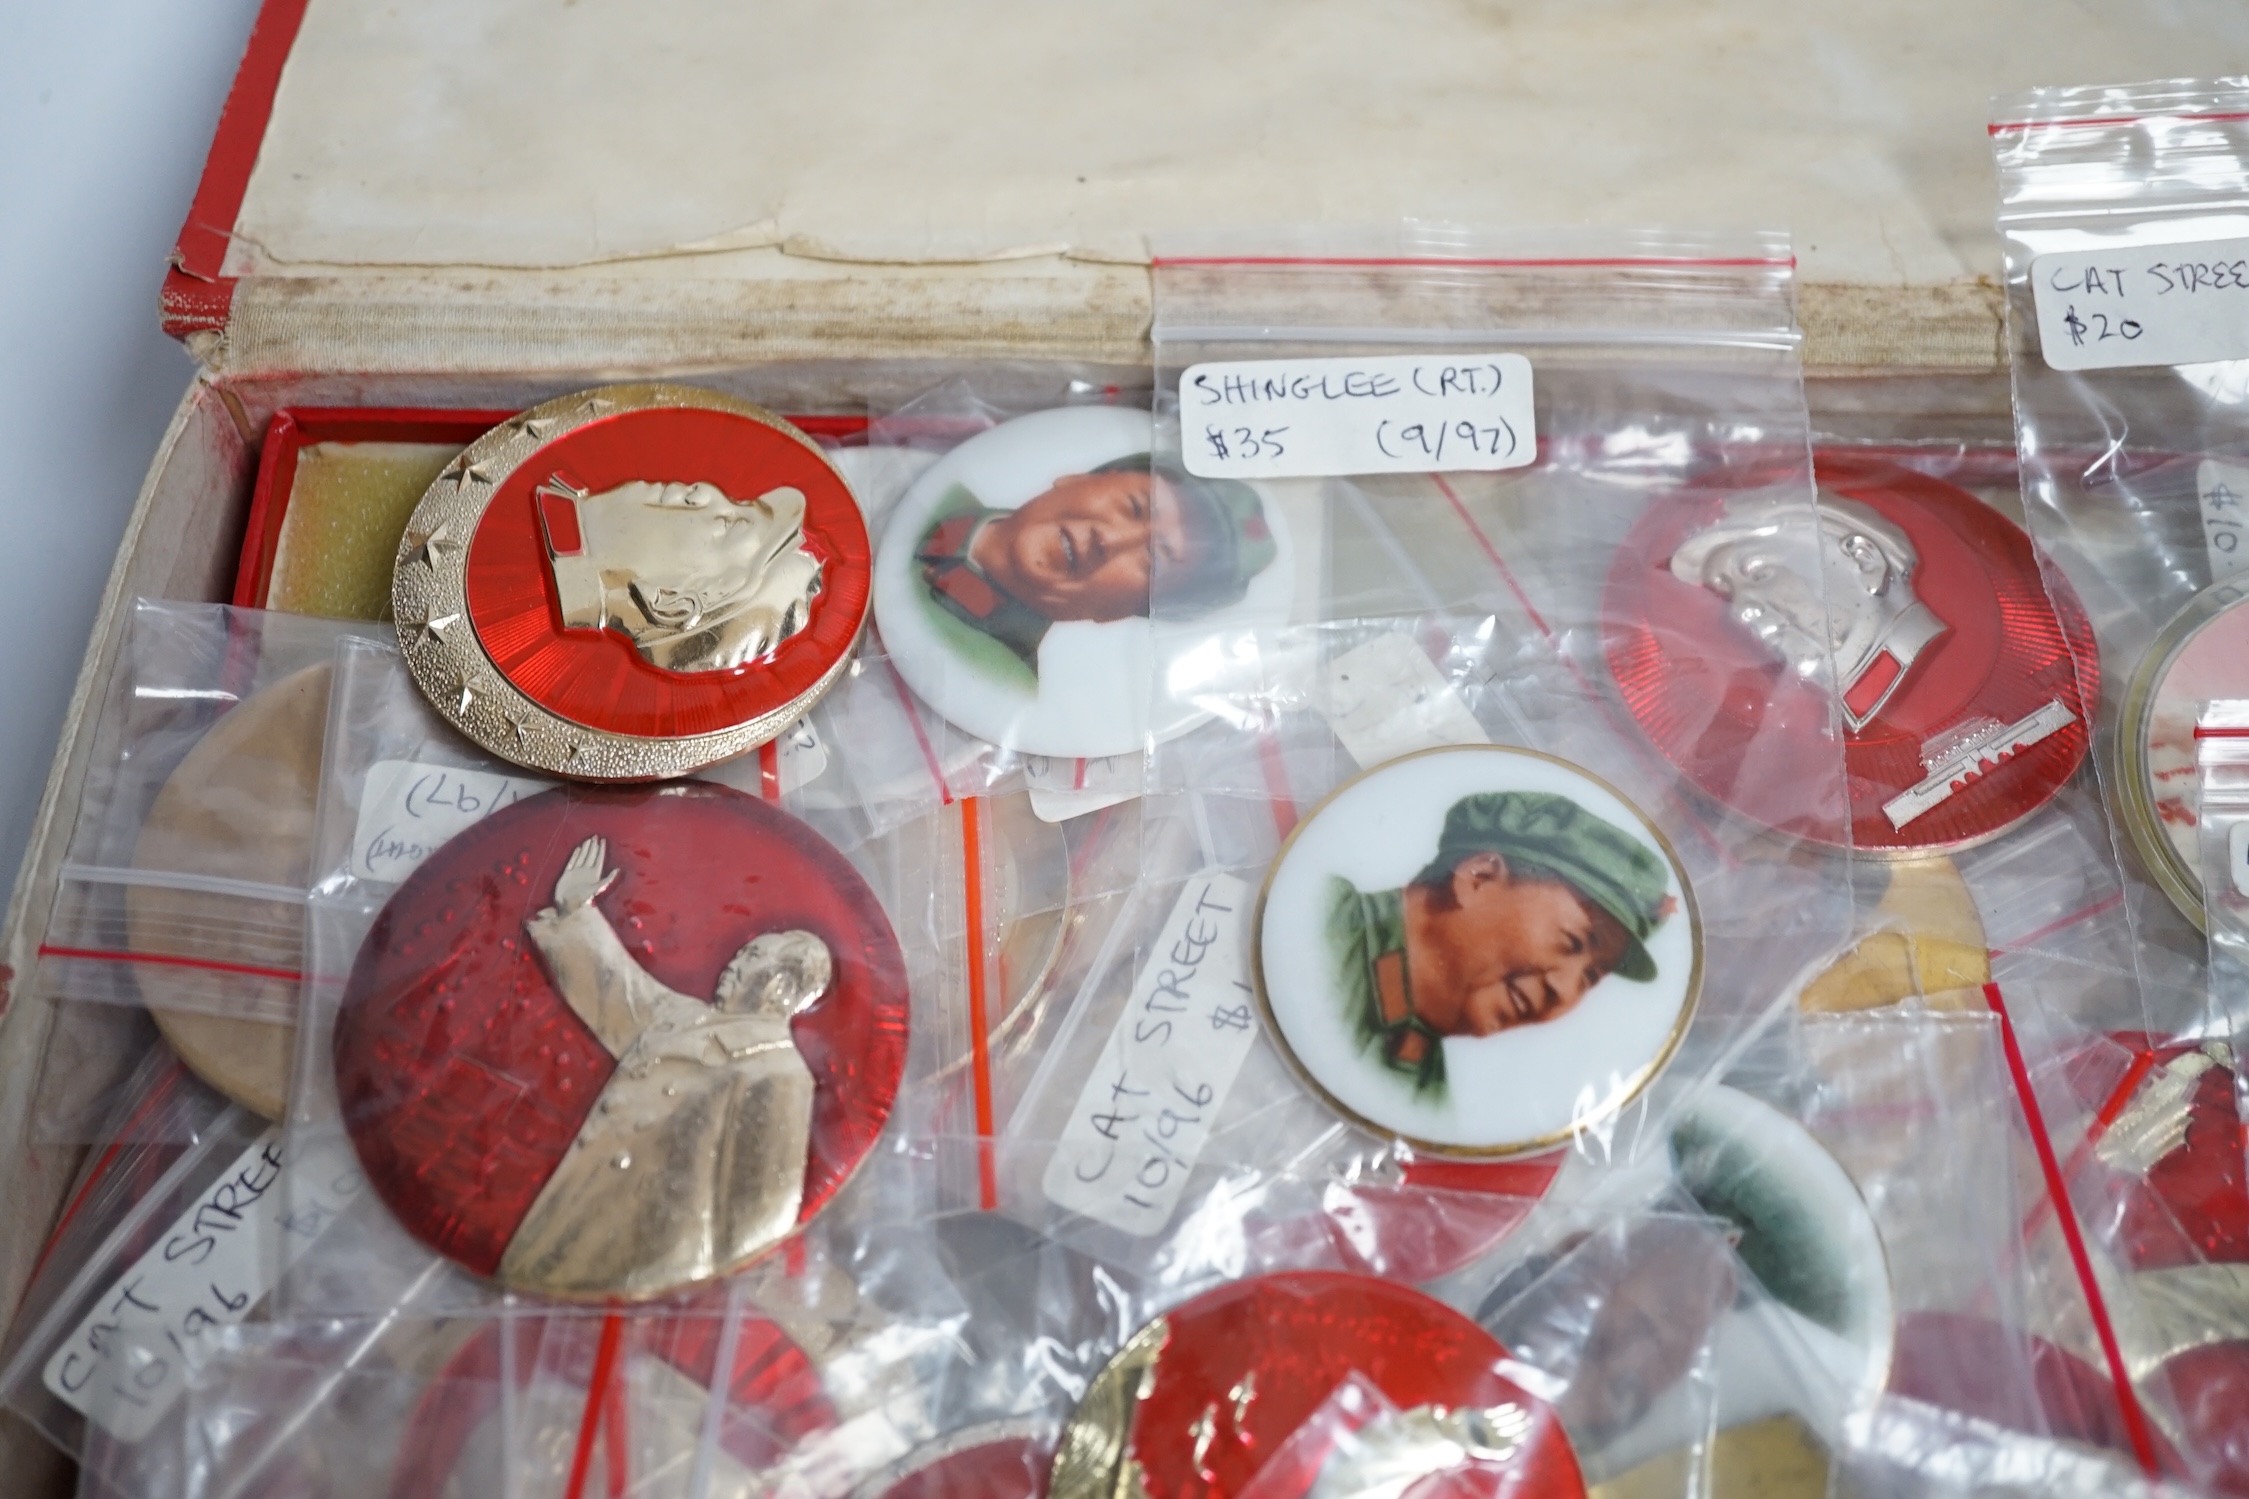 A collection of forty one Chinese Mao Zedong badges and a box - Image 3 of 3